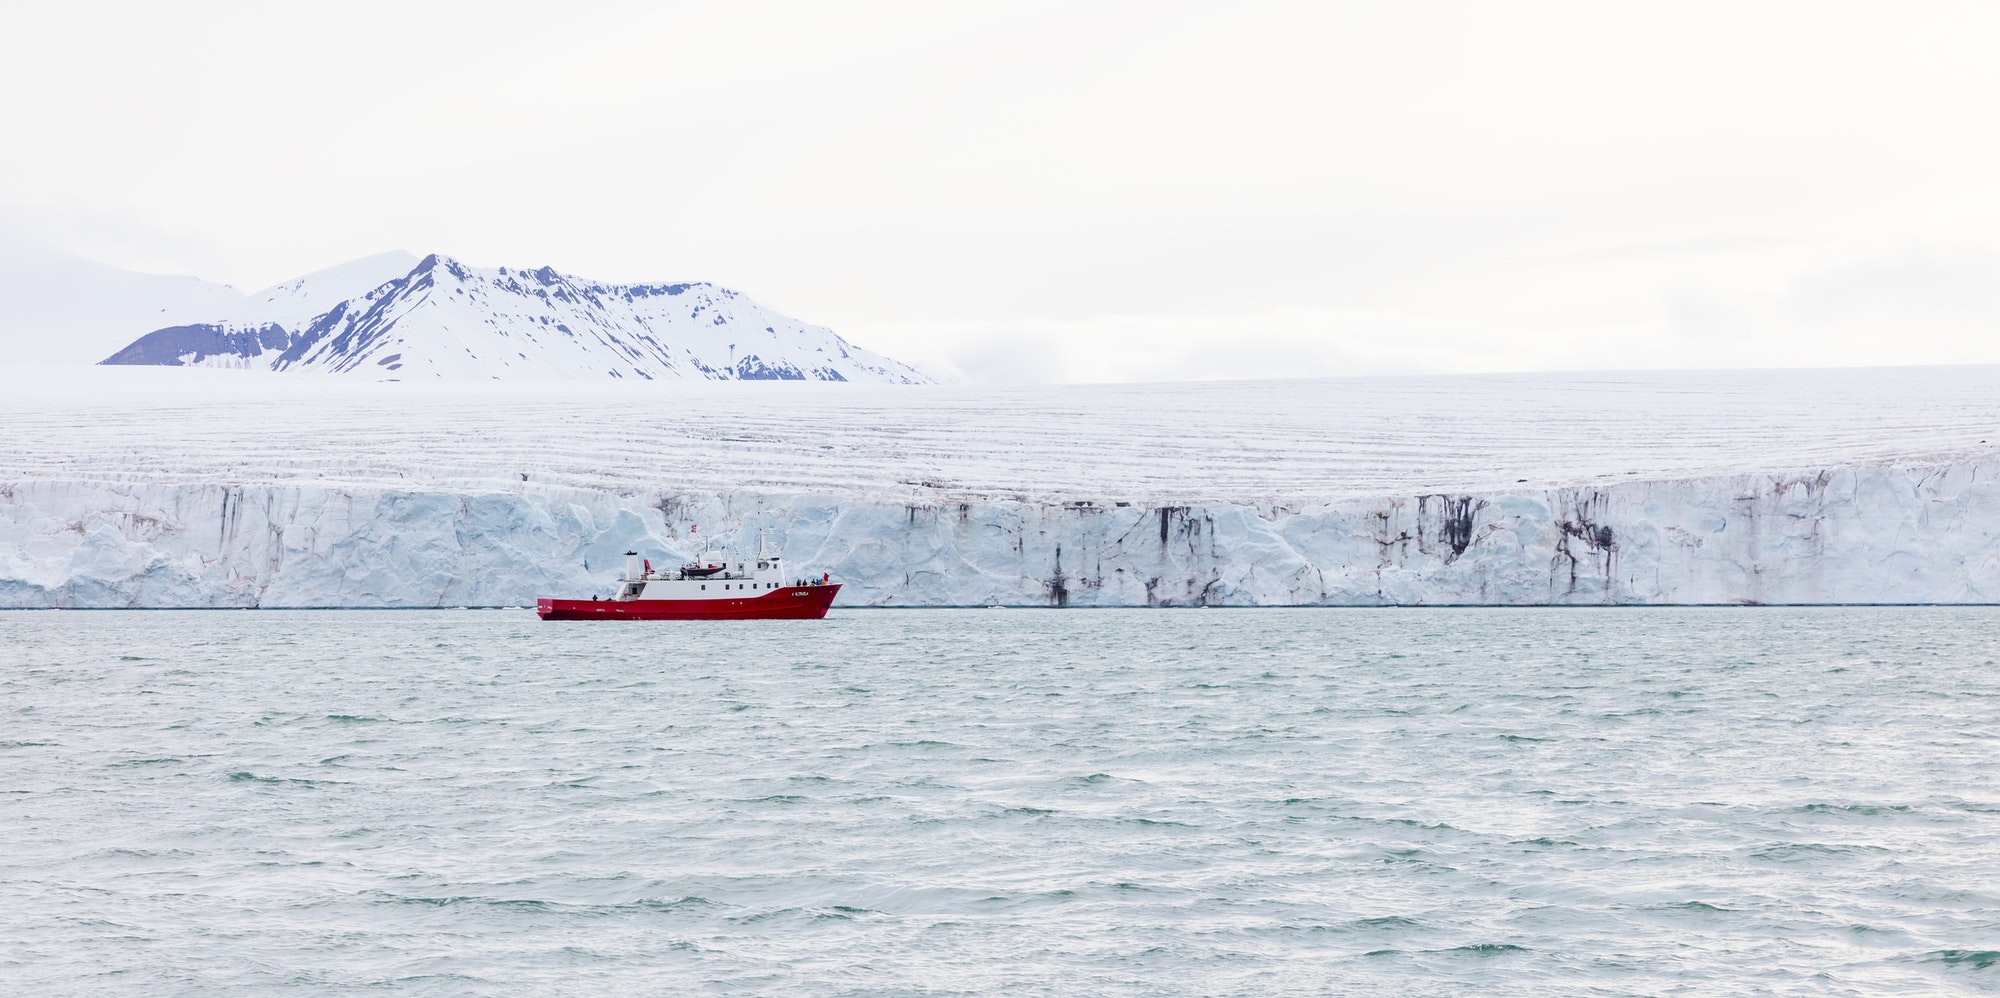 Expedition or tourist boat in front of the large and massive Borebreen glacier. Arctic environment in Oscar II Land at Spitsbergen, Svalbard.